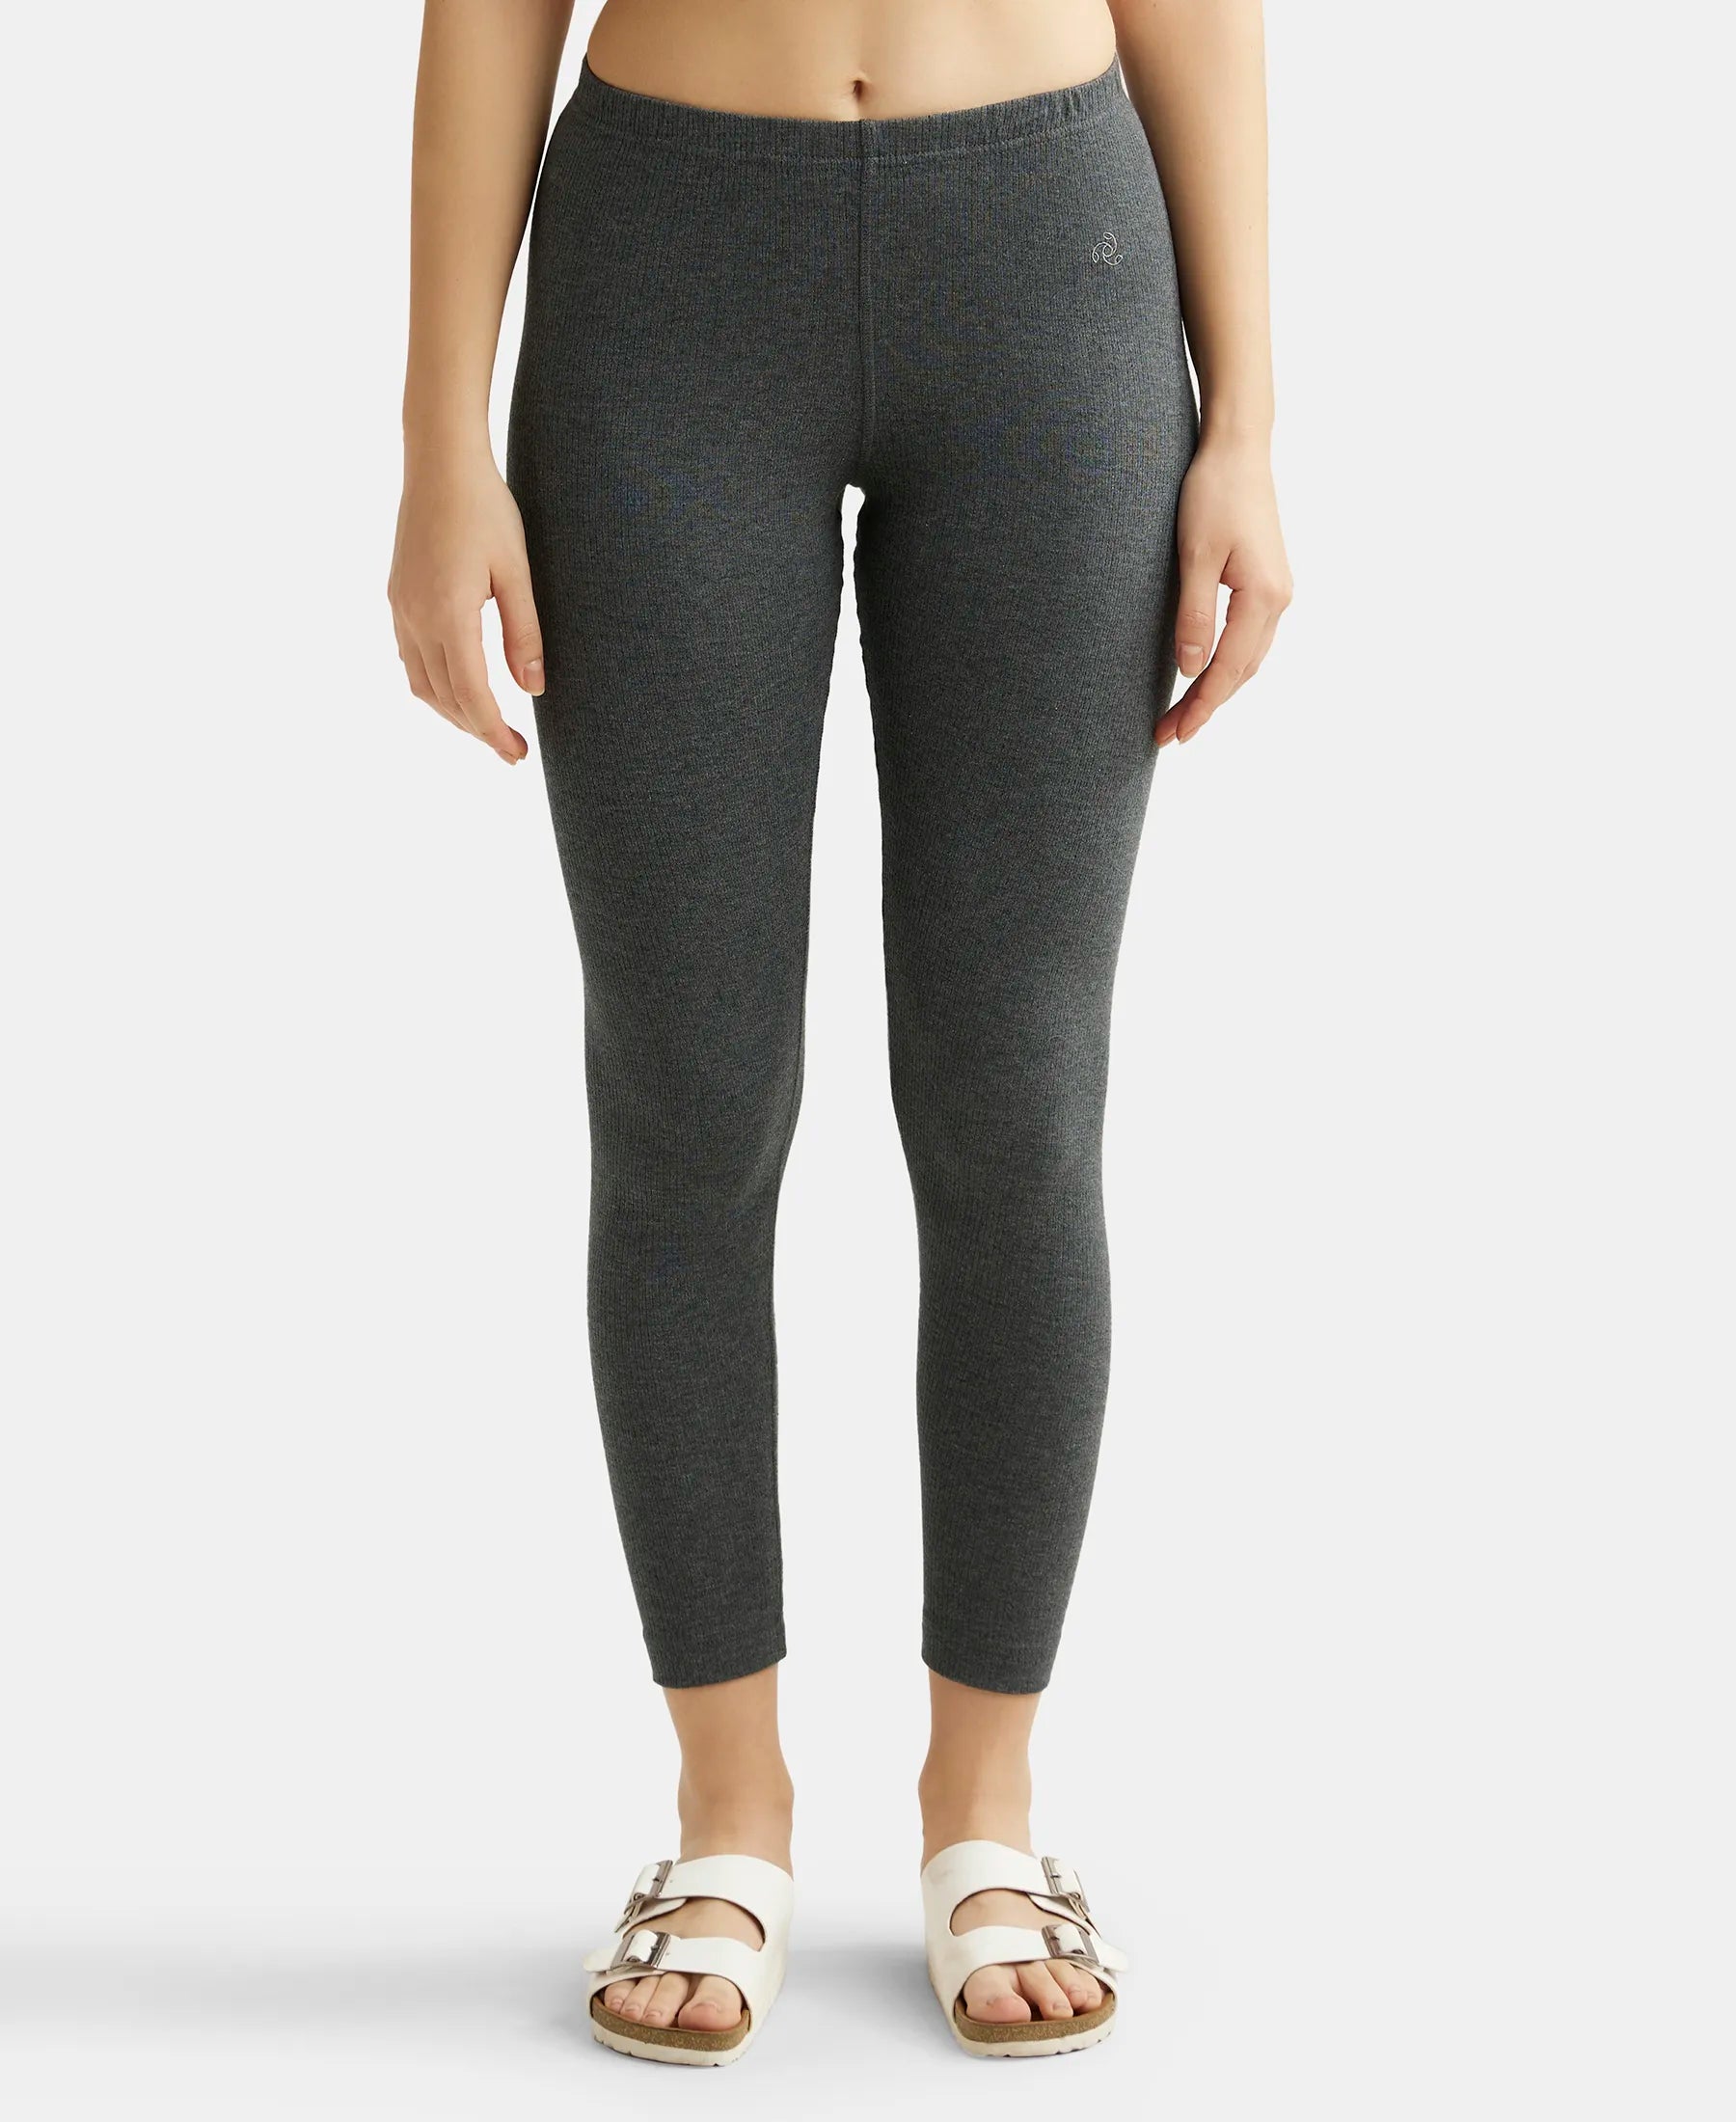 Buy Super Combed Cotton Rich Thermal Leggings with StayWarm Technology -  Charcoal Melange 2520